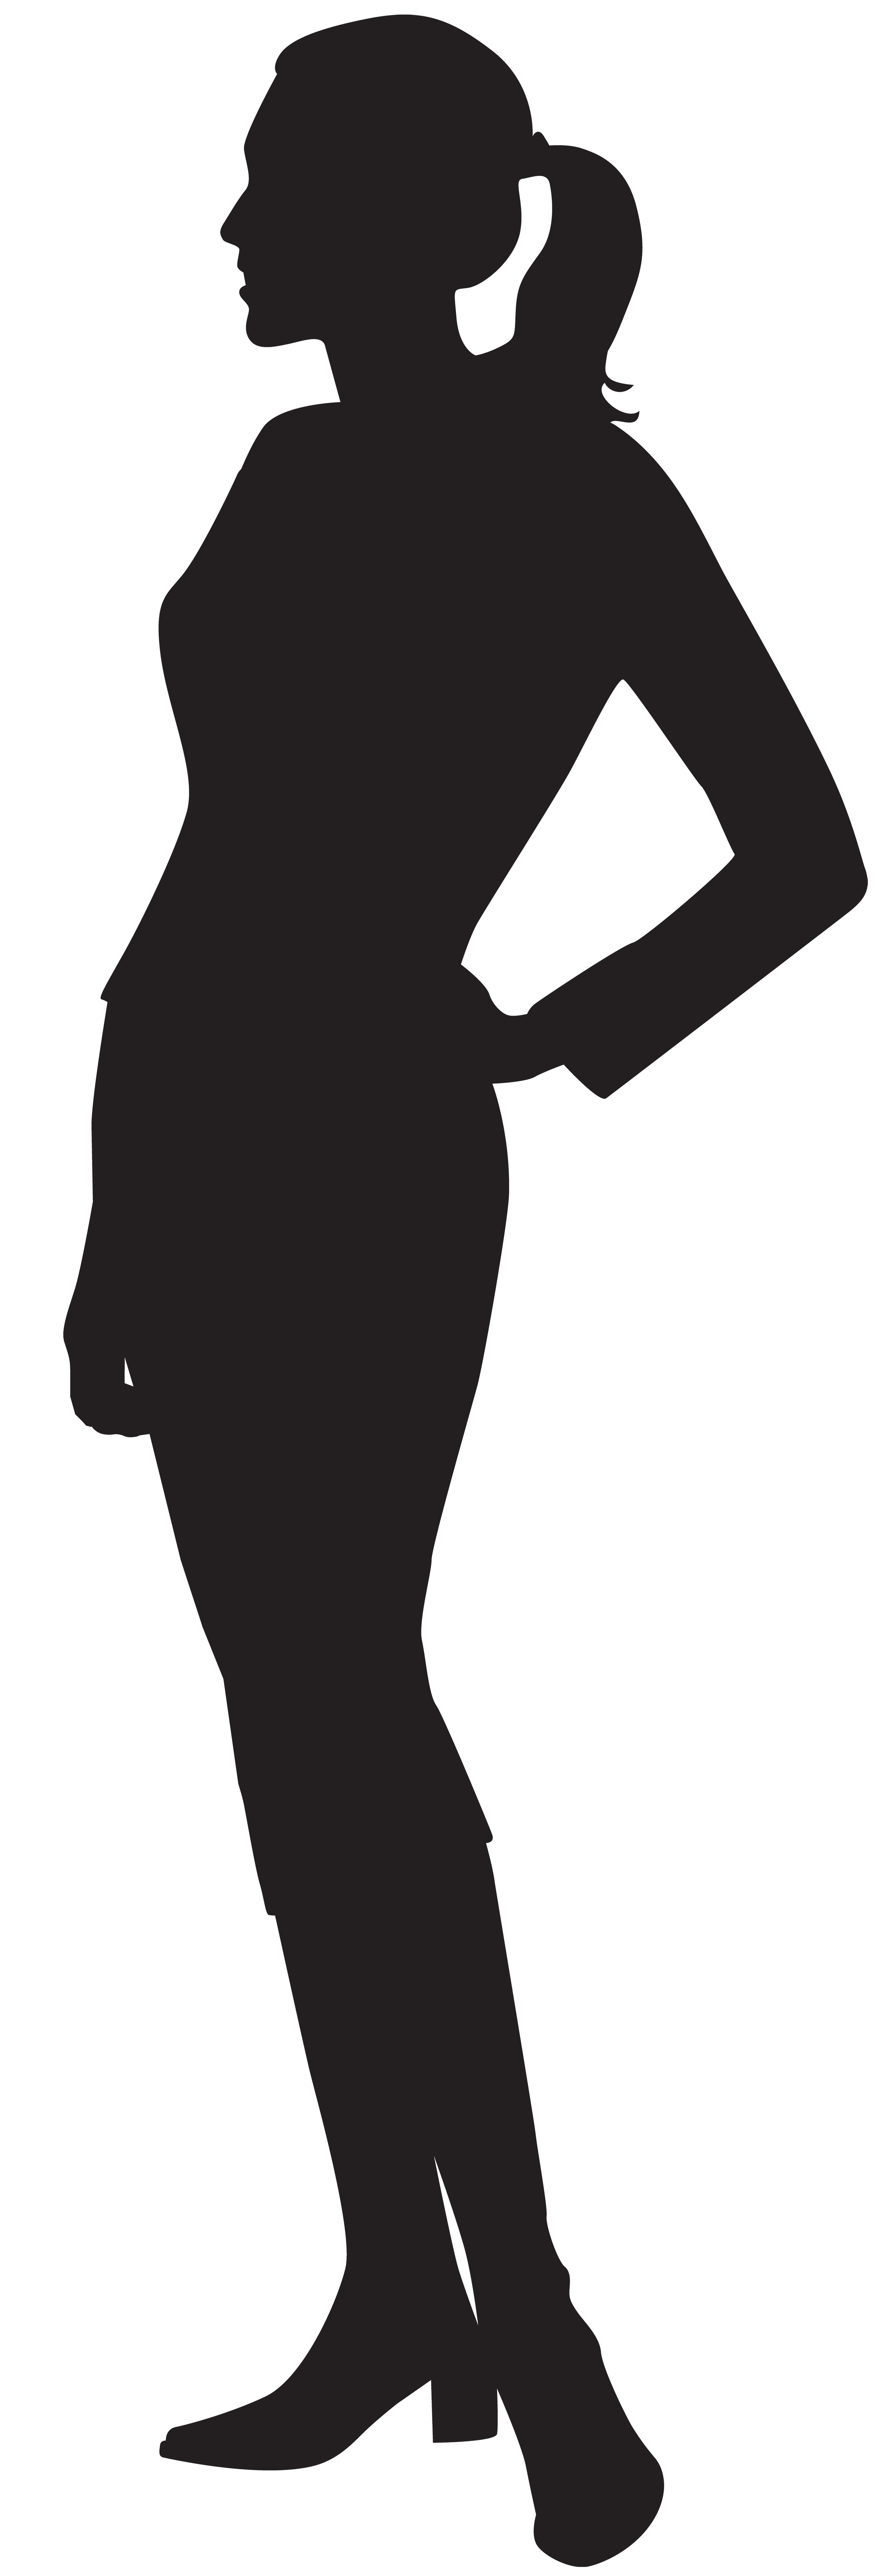 Silhouette Clip art - Female Silhouette Clip Art PNG Image png download